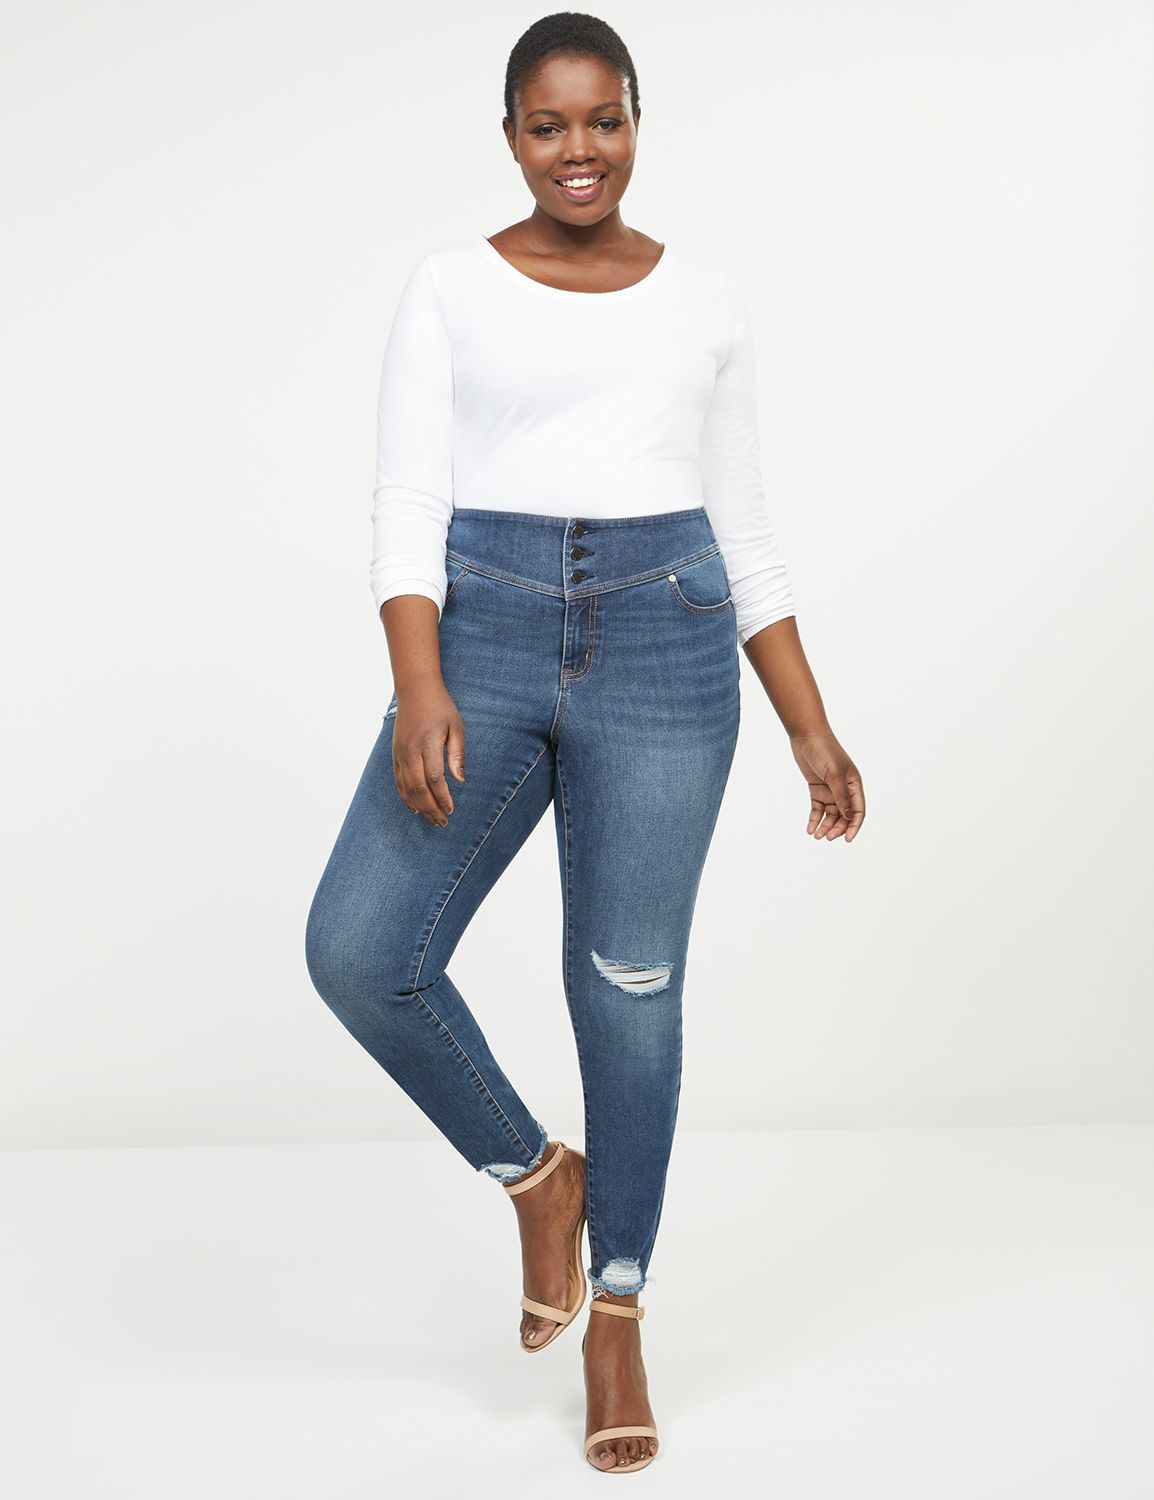 lane bryant high waisted jeans